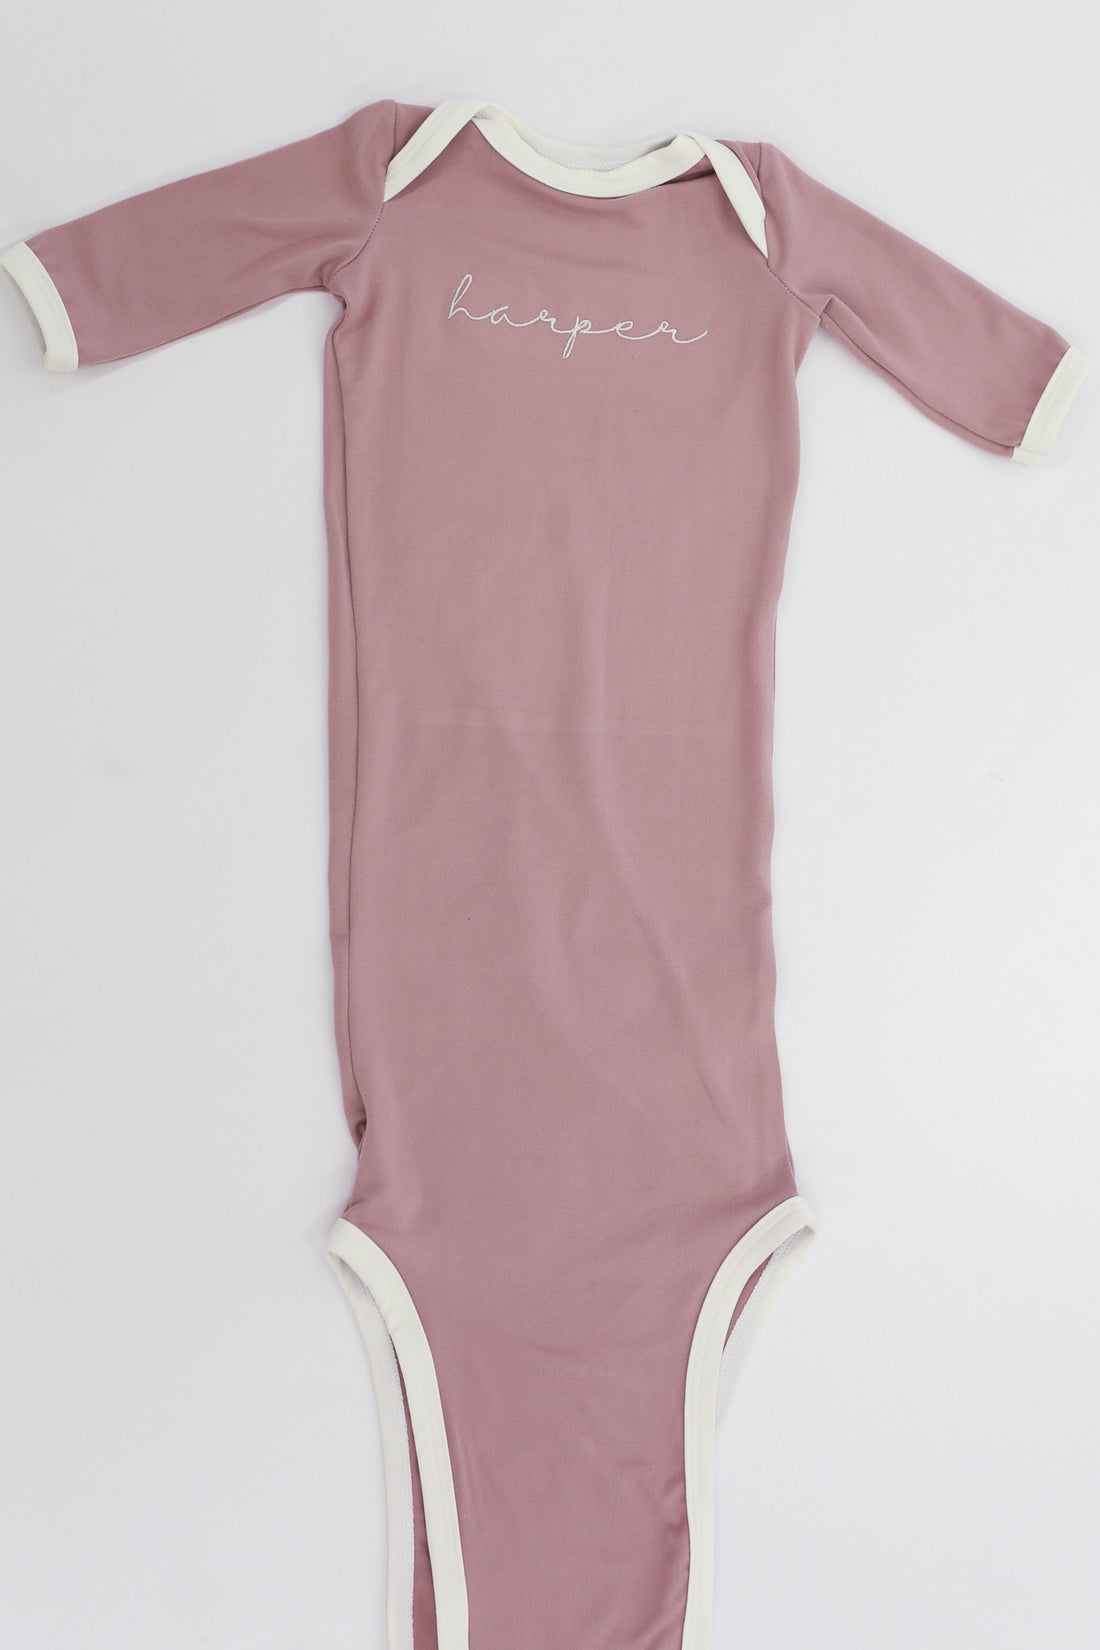 Embroidered Sweet Mauve Knotted Baby Gown